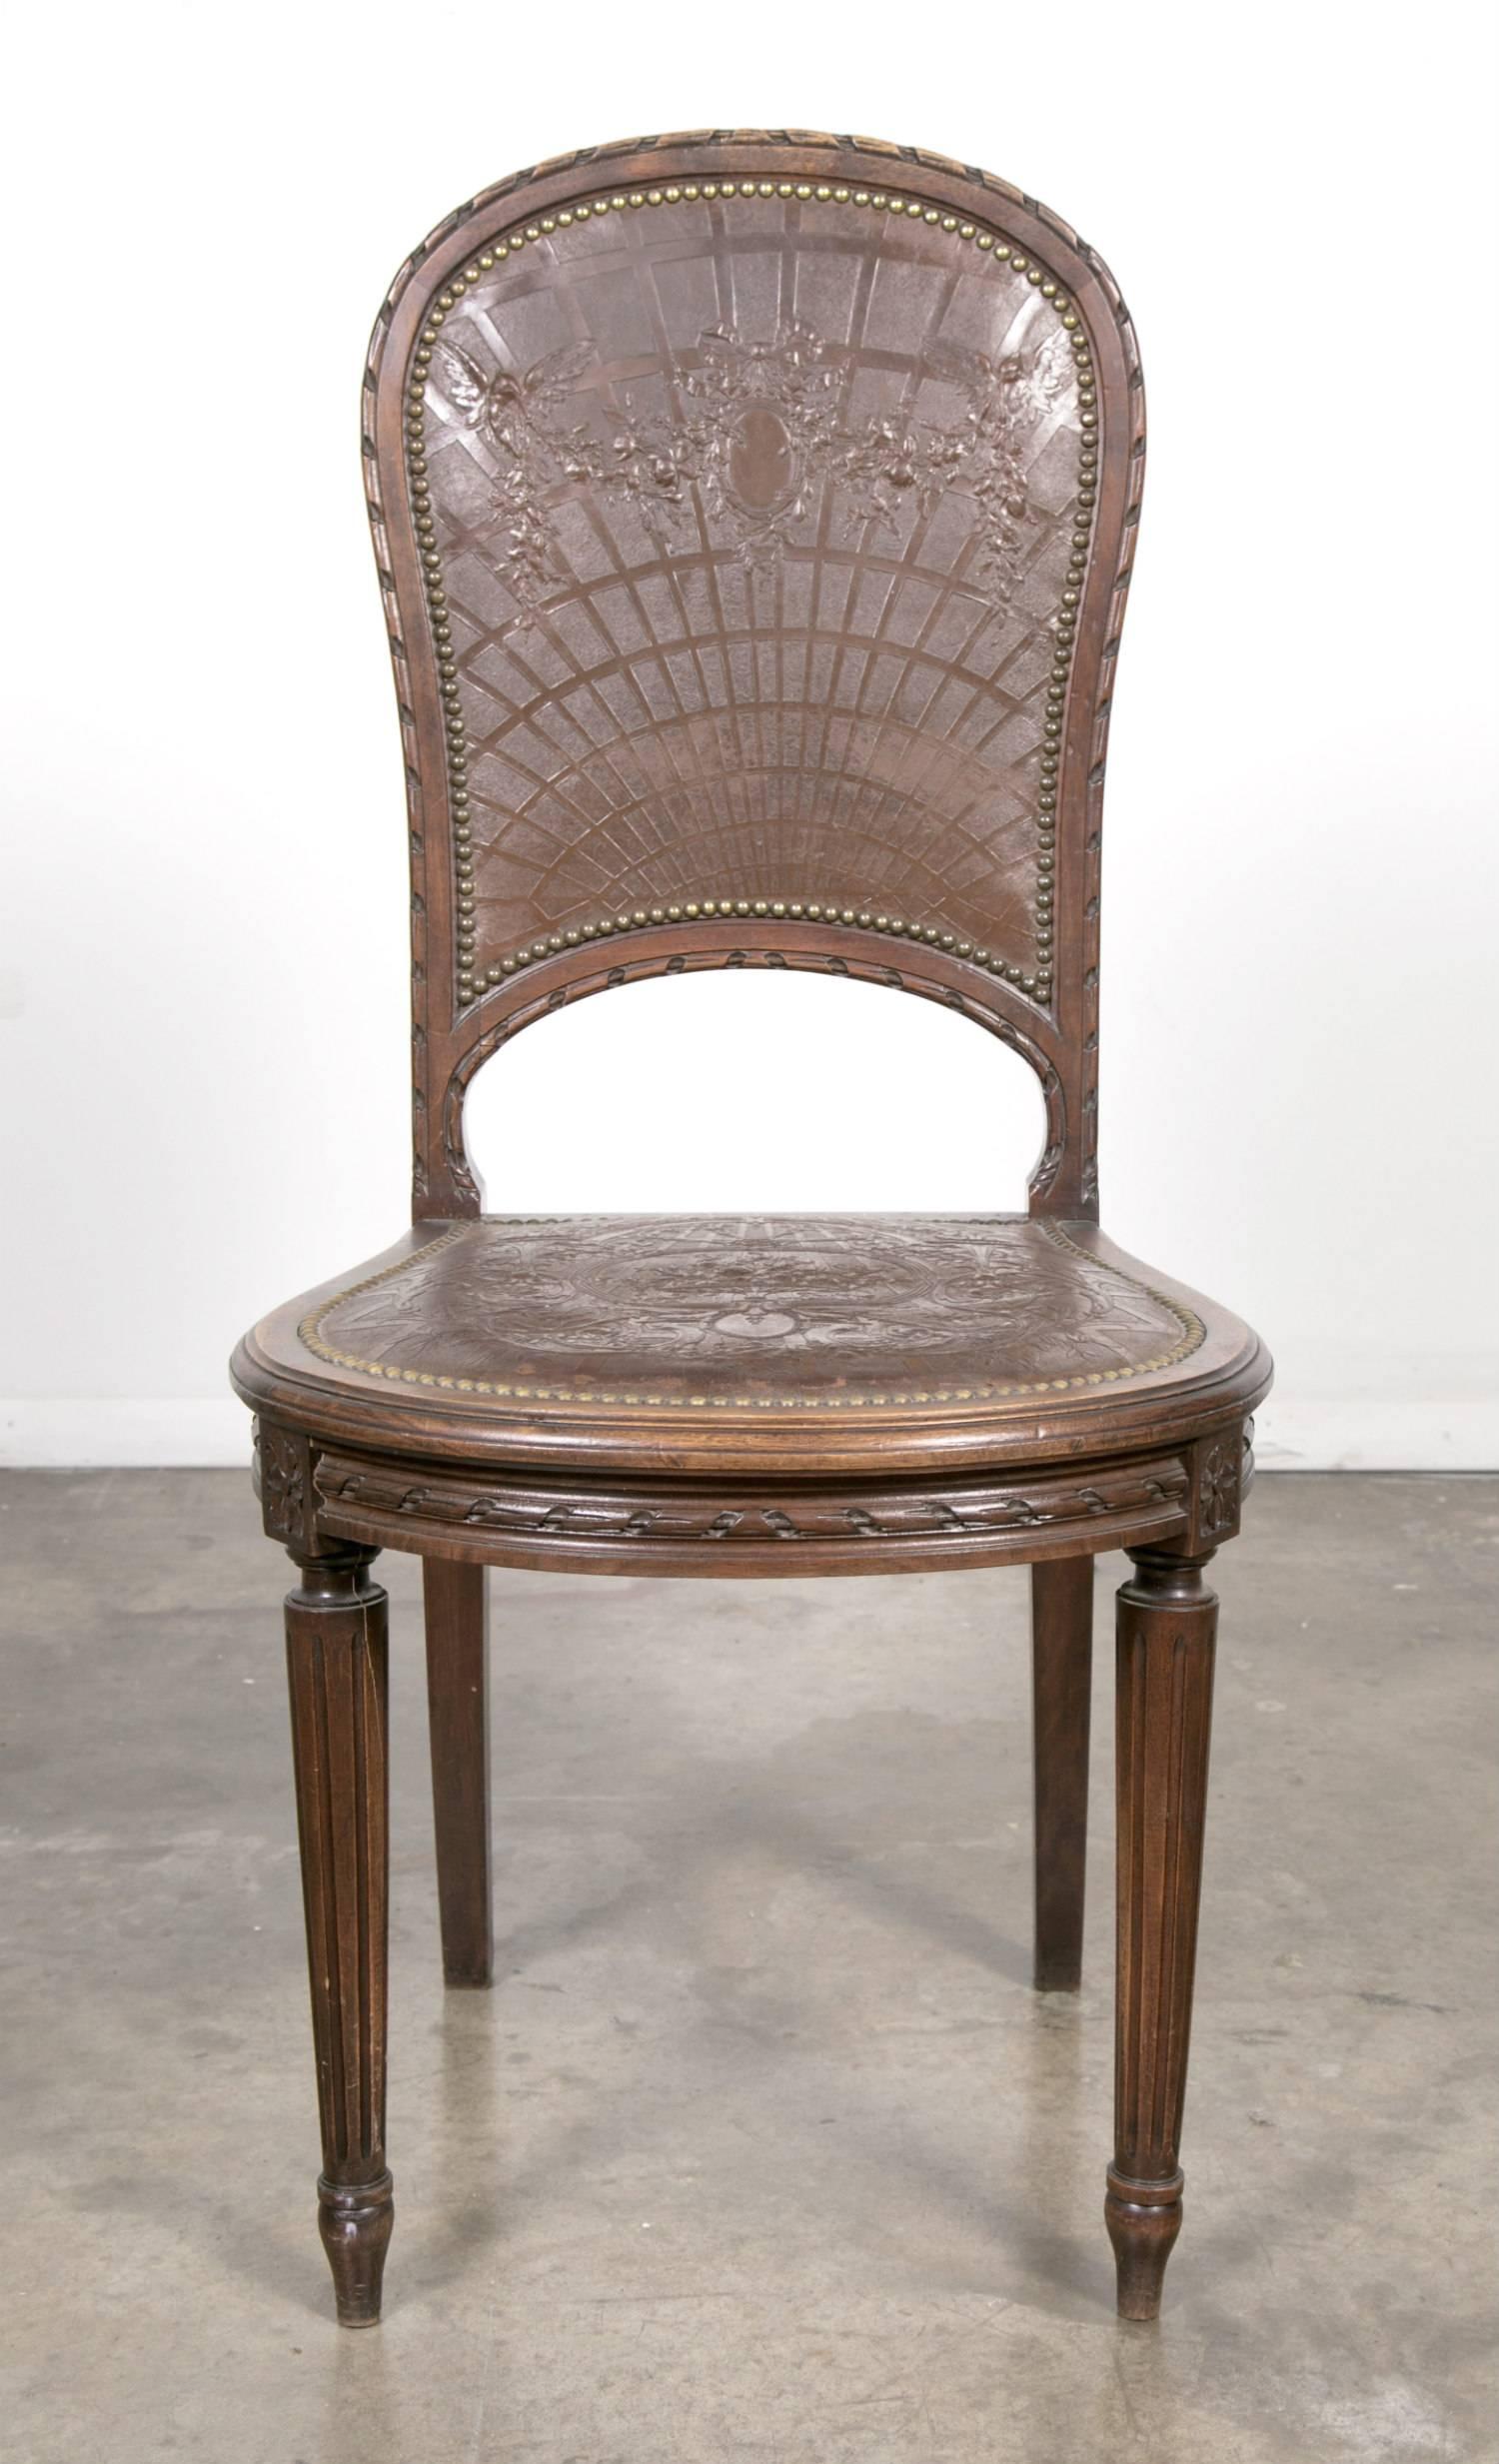 Elegant set of six French Louis XVI style tooled leather dining chairs handcrafted in Paris, having beautifully crafted solid oak frames and original tooled leather seats and backs with nailhead trim, circa 1880s. The intricate tooled leather design